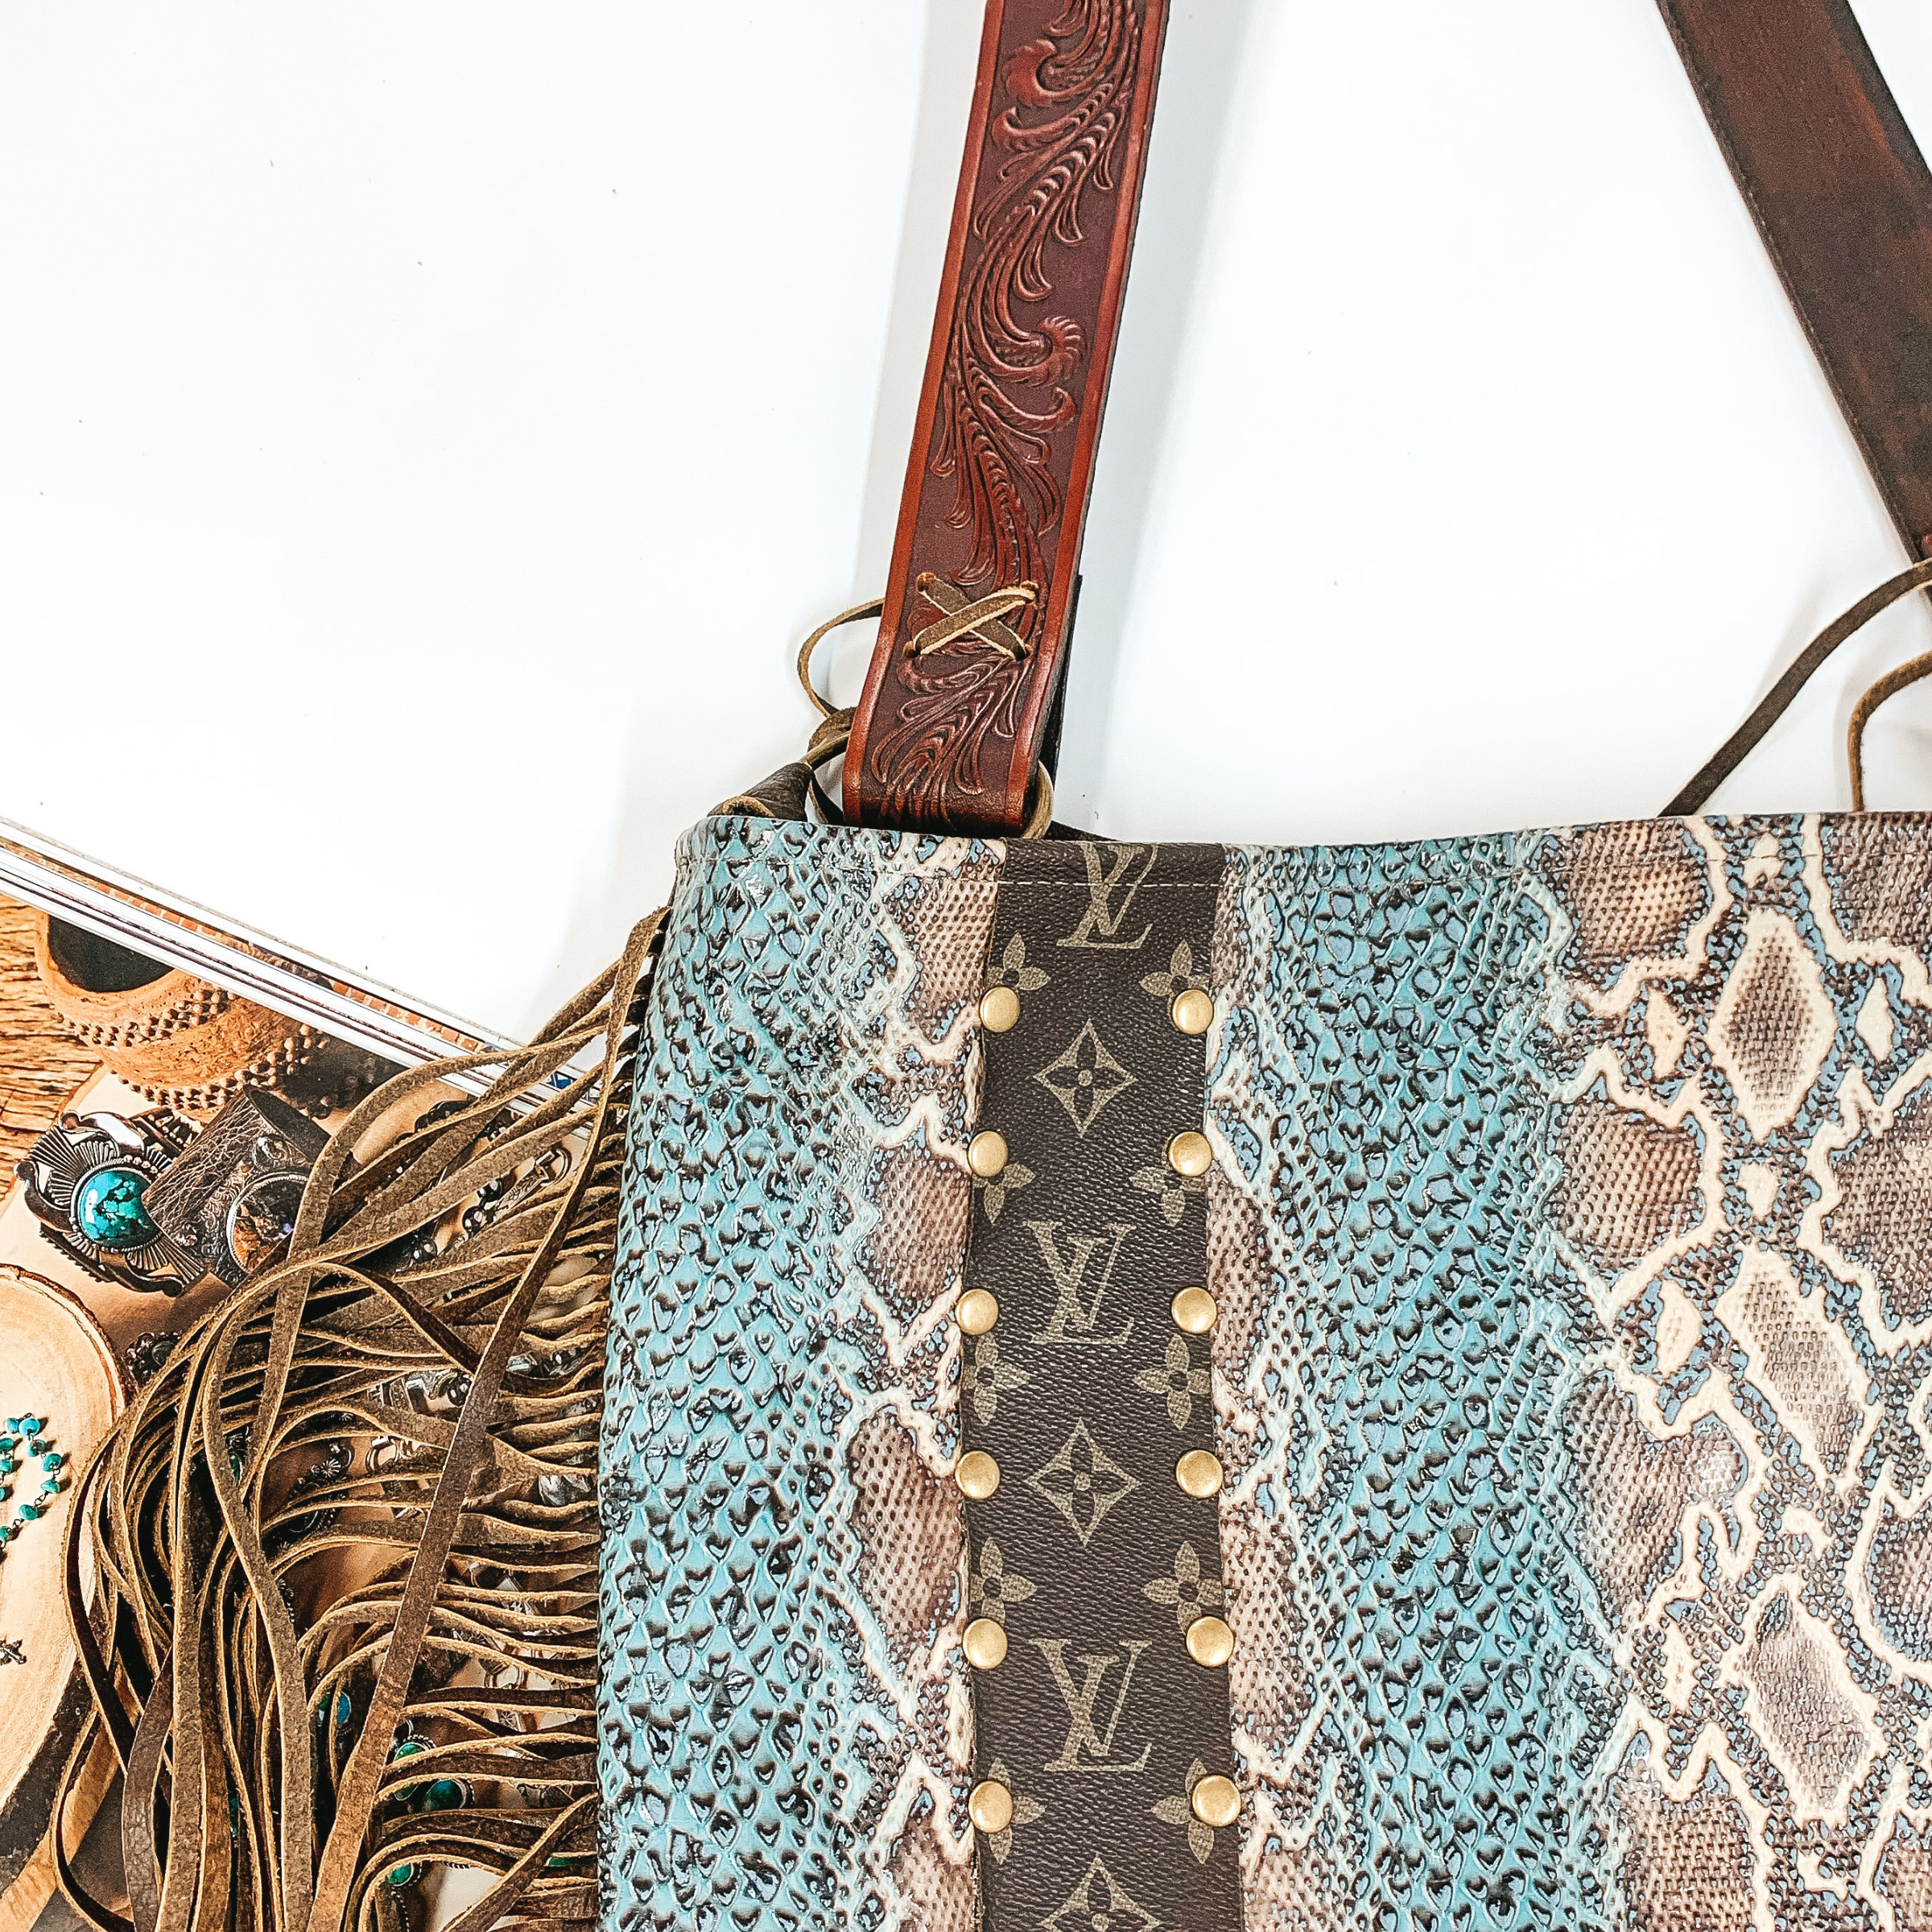 Keep It Gypsy | Hazel Bag in Turquoise Snake Print with Leather Fringe and Tooled Purse Strap - Giddy Up Glamour Boutique